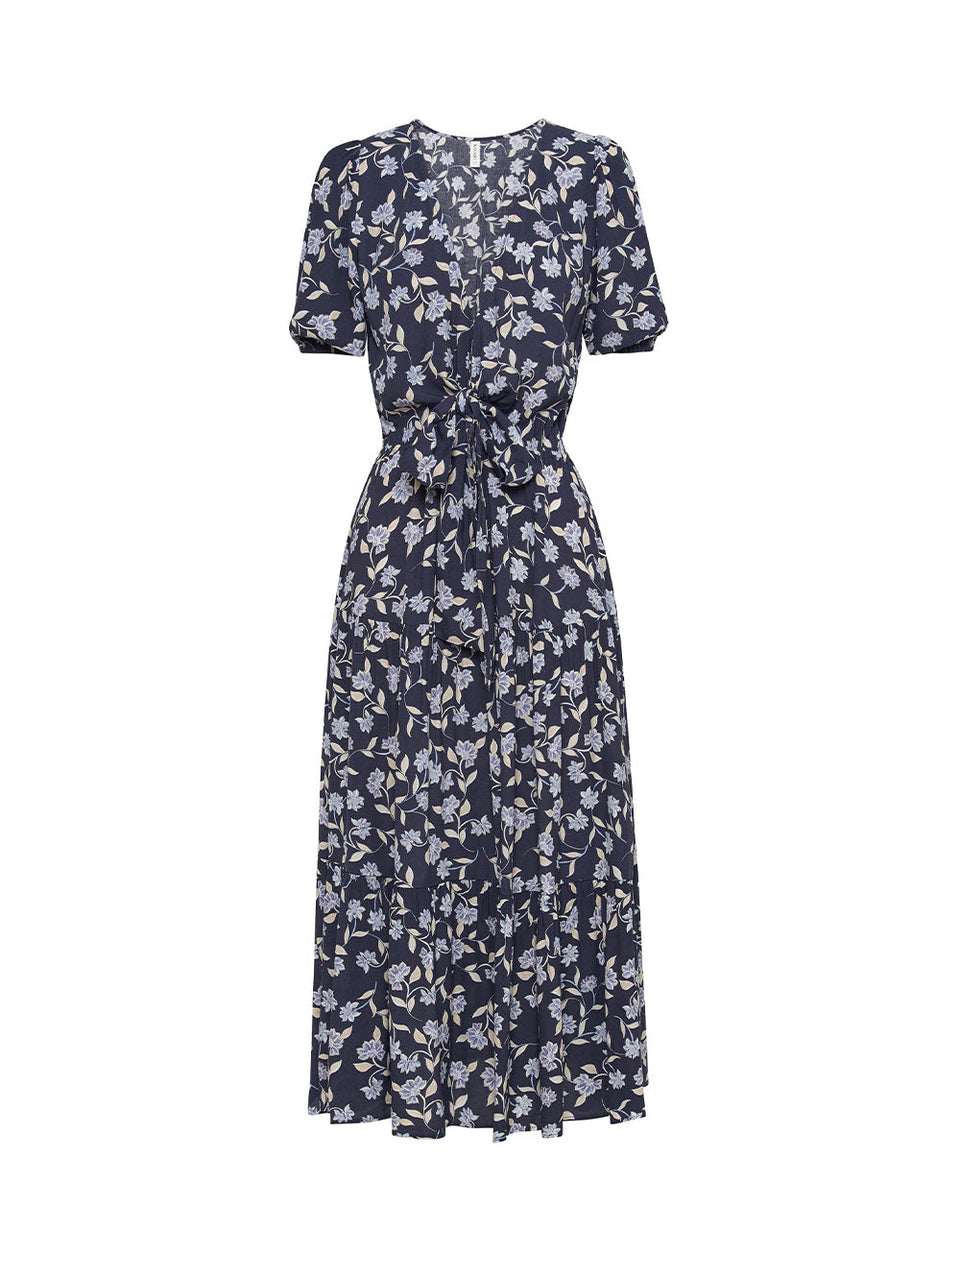 Ghost image of KIVARI Jeanne Tie Front Midi Dress: A navy and sky blue floral dress made from sustainable LENZING Viscose Crepe and featuring a tie front, elasticated waist, short puff sleeves and tiered skirt.